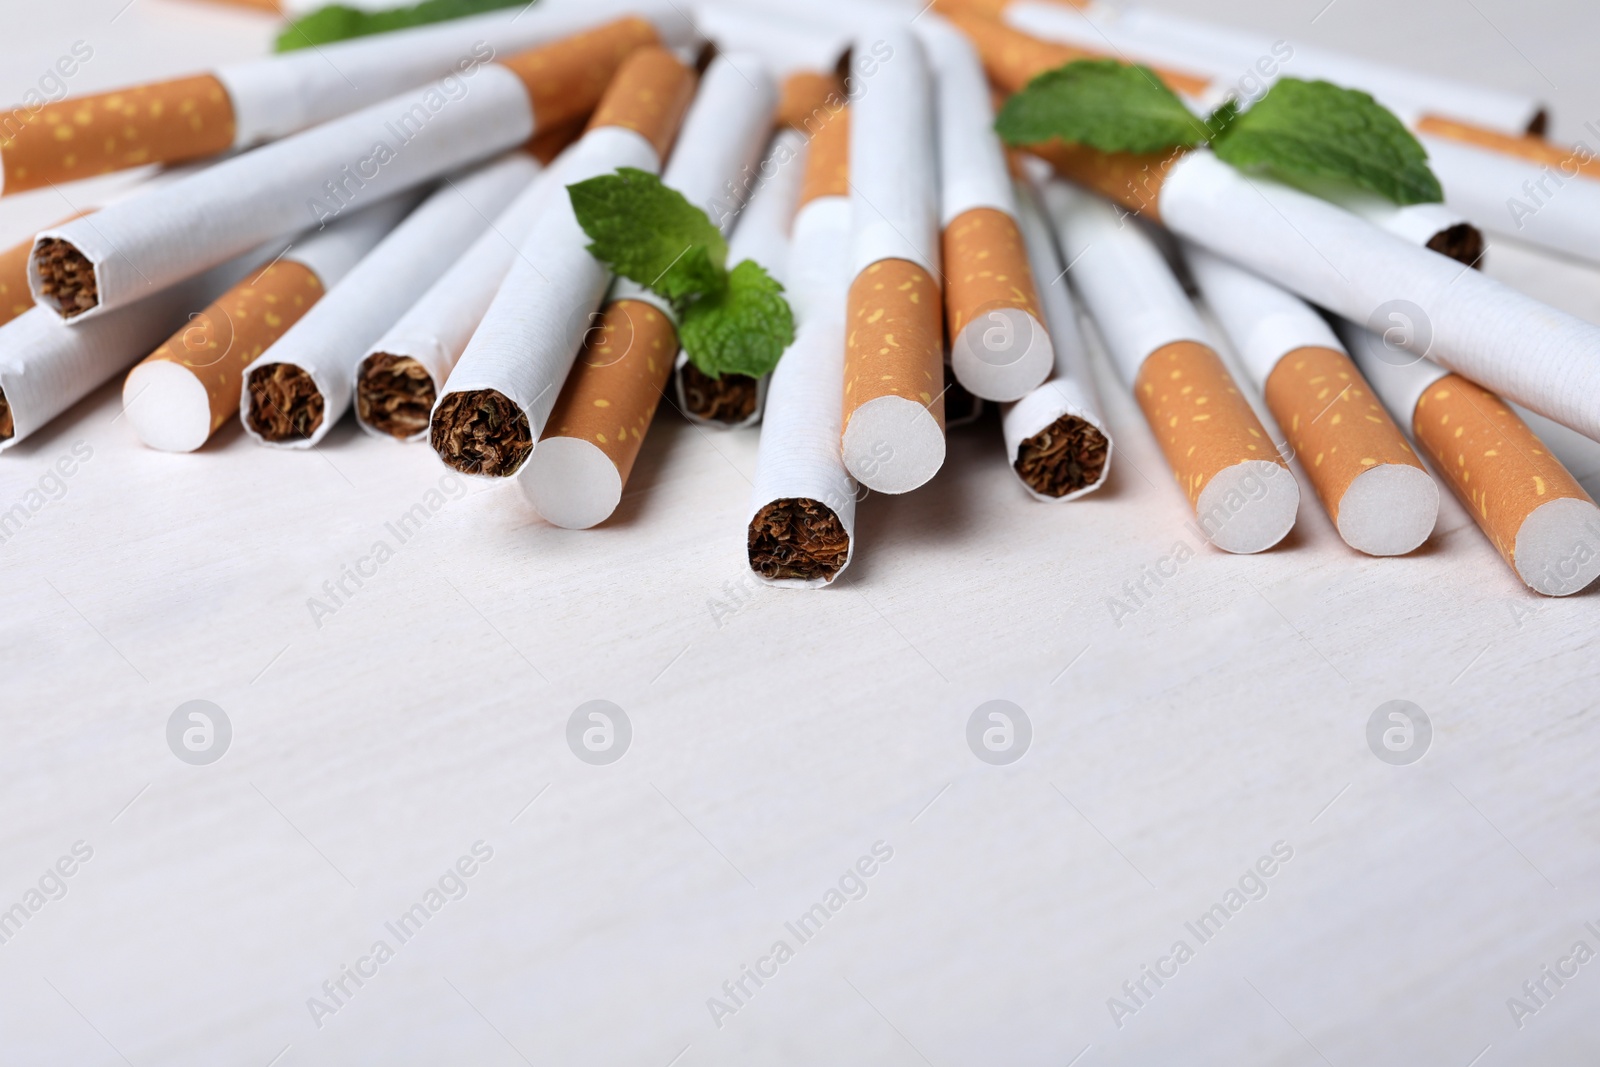 Photo of Menthol cigarettes and mint on white wooden table. Space for text